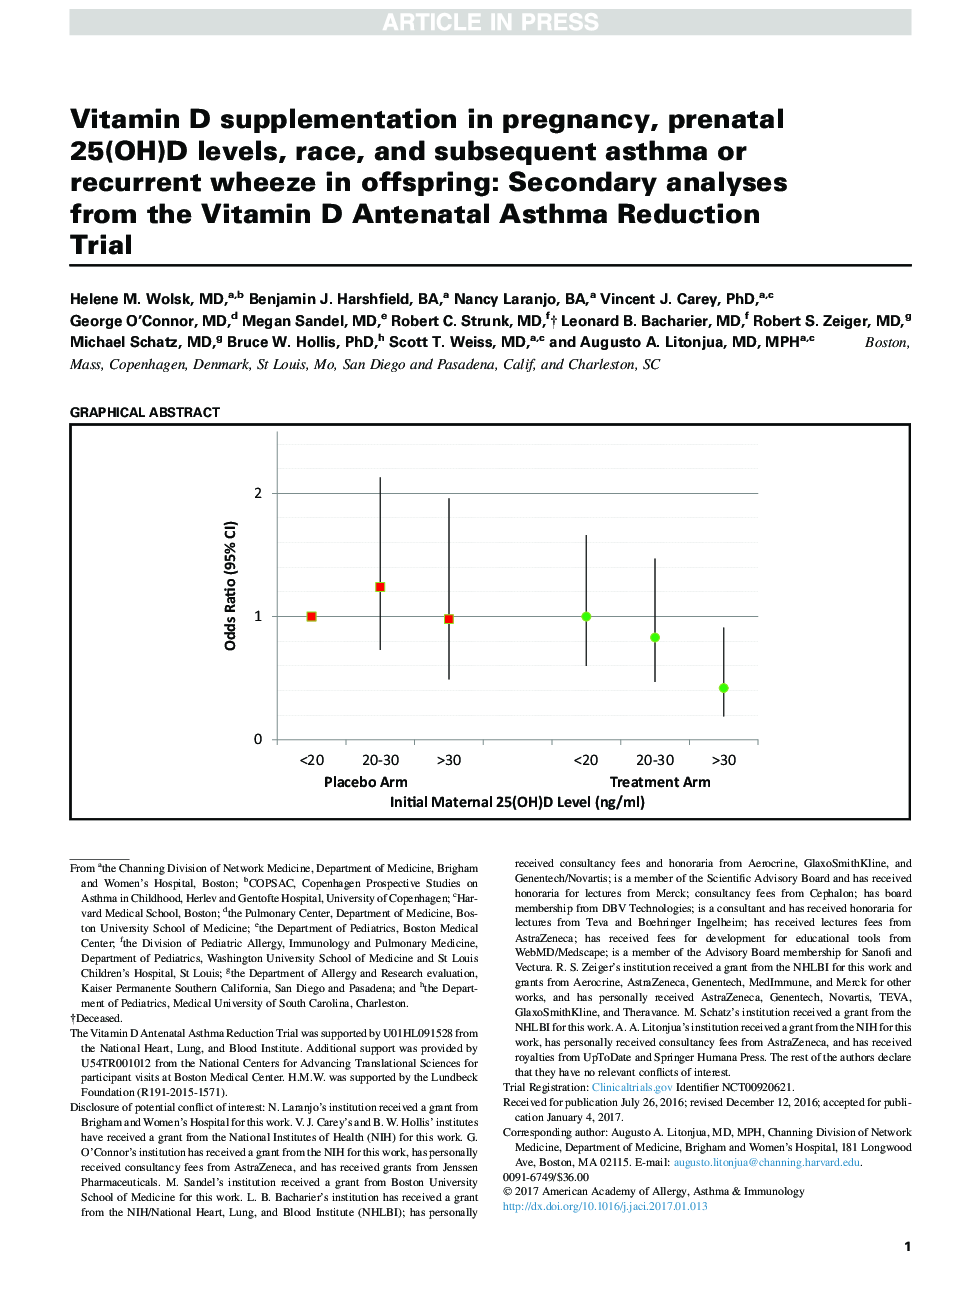 Vitamin D supplementation in pregnancy, prenatal 25(OH)D levels, race, and subsequent asthma or recurrent wheeze in offspring: Secondary analyses from the Vitamin D Antenatal Asthma Reduction Trial